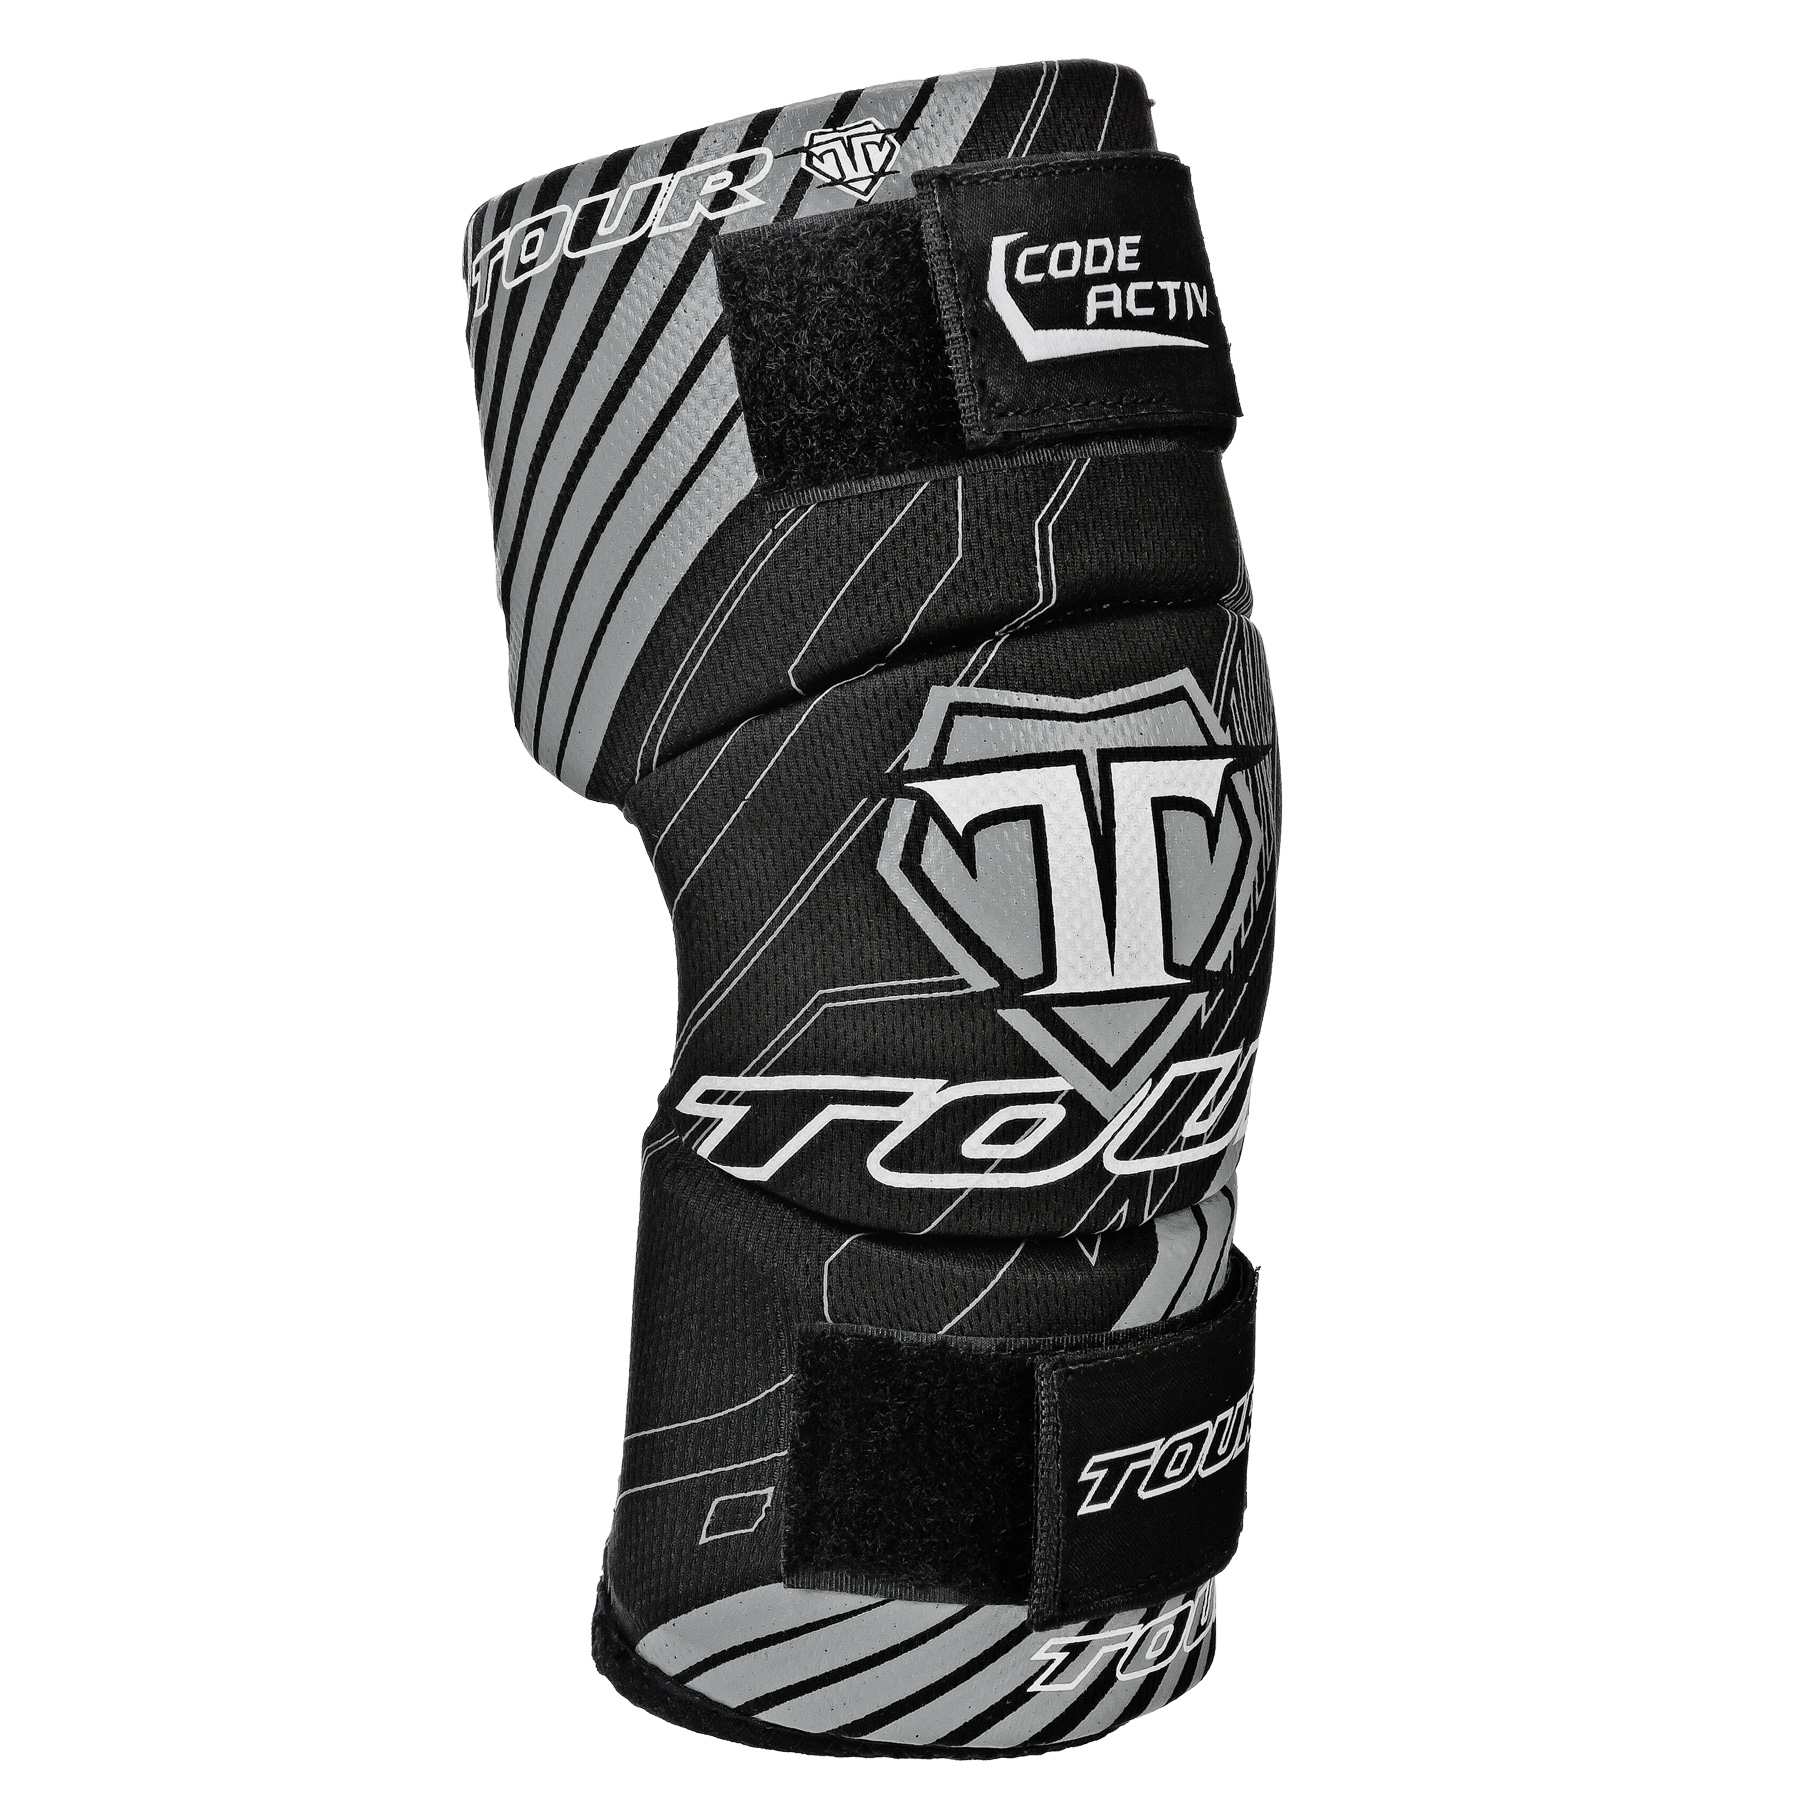 
ELBOW PADS CODE ACTIV ADULT